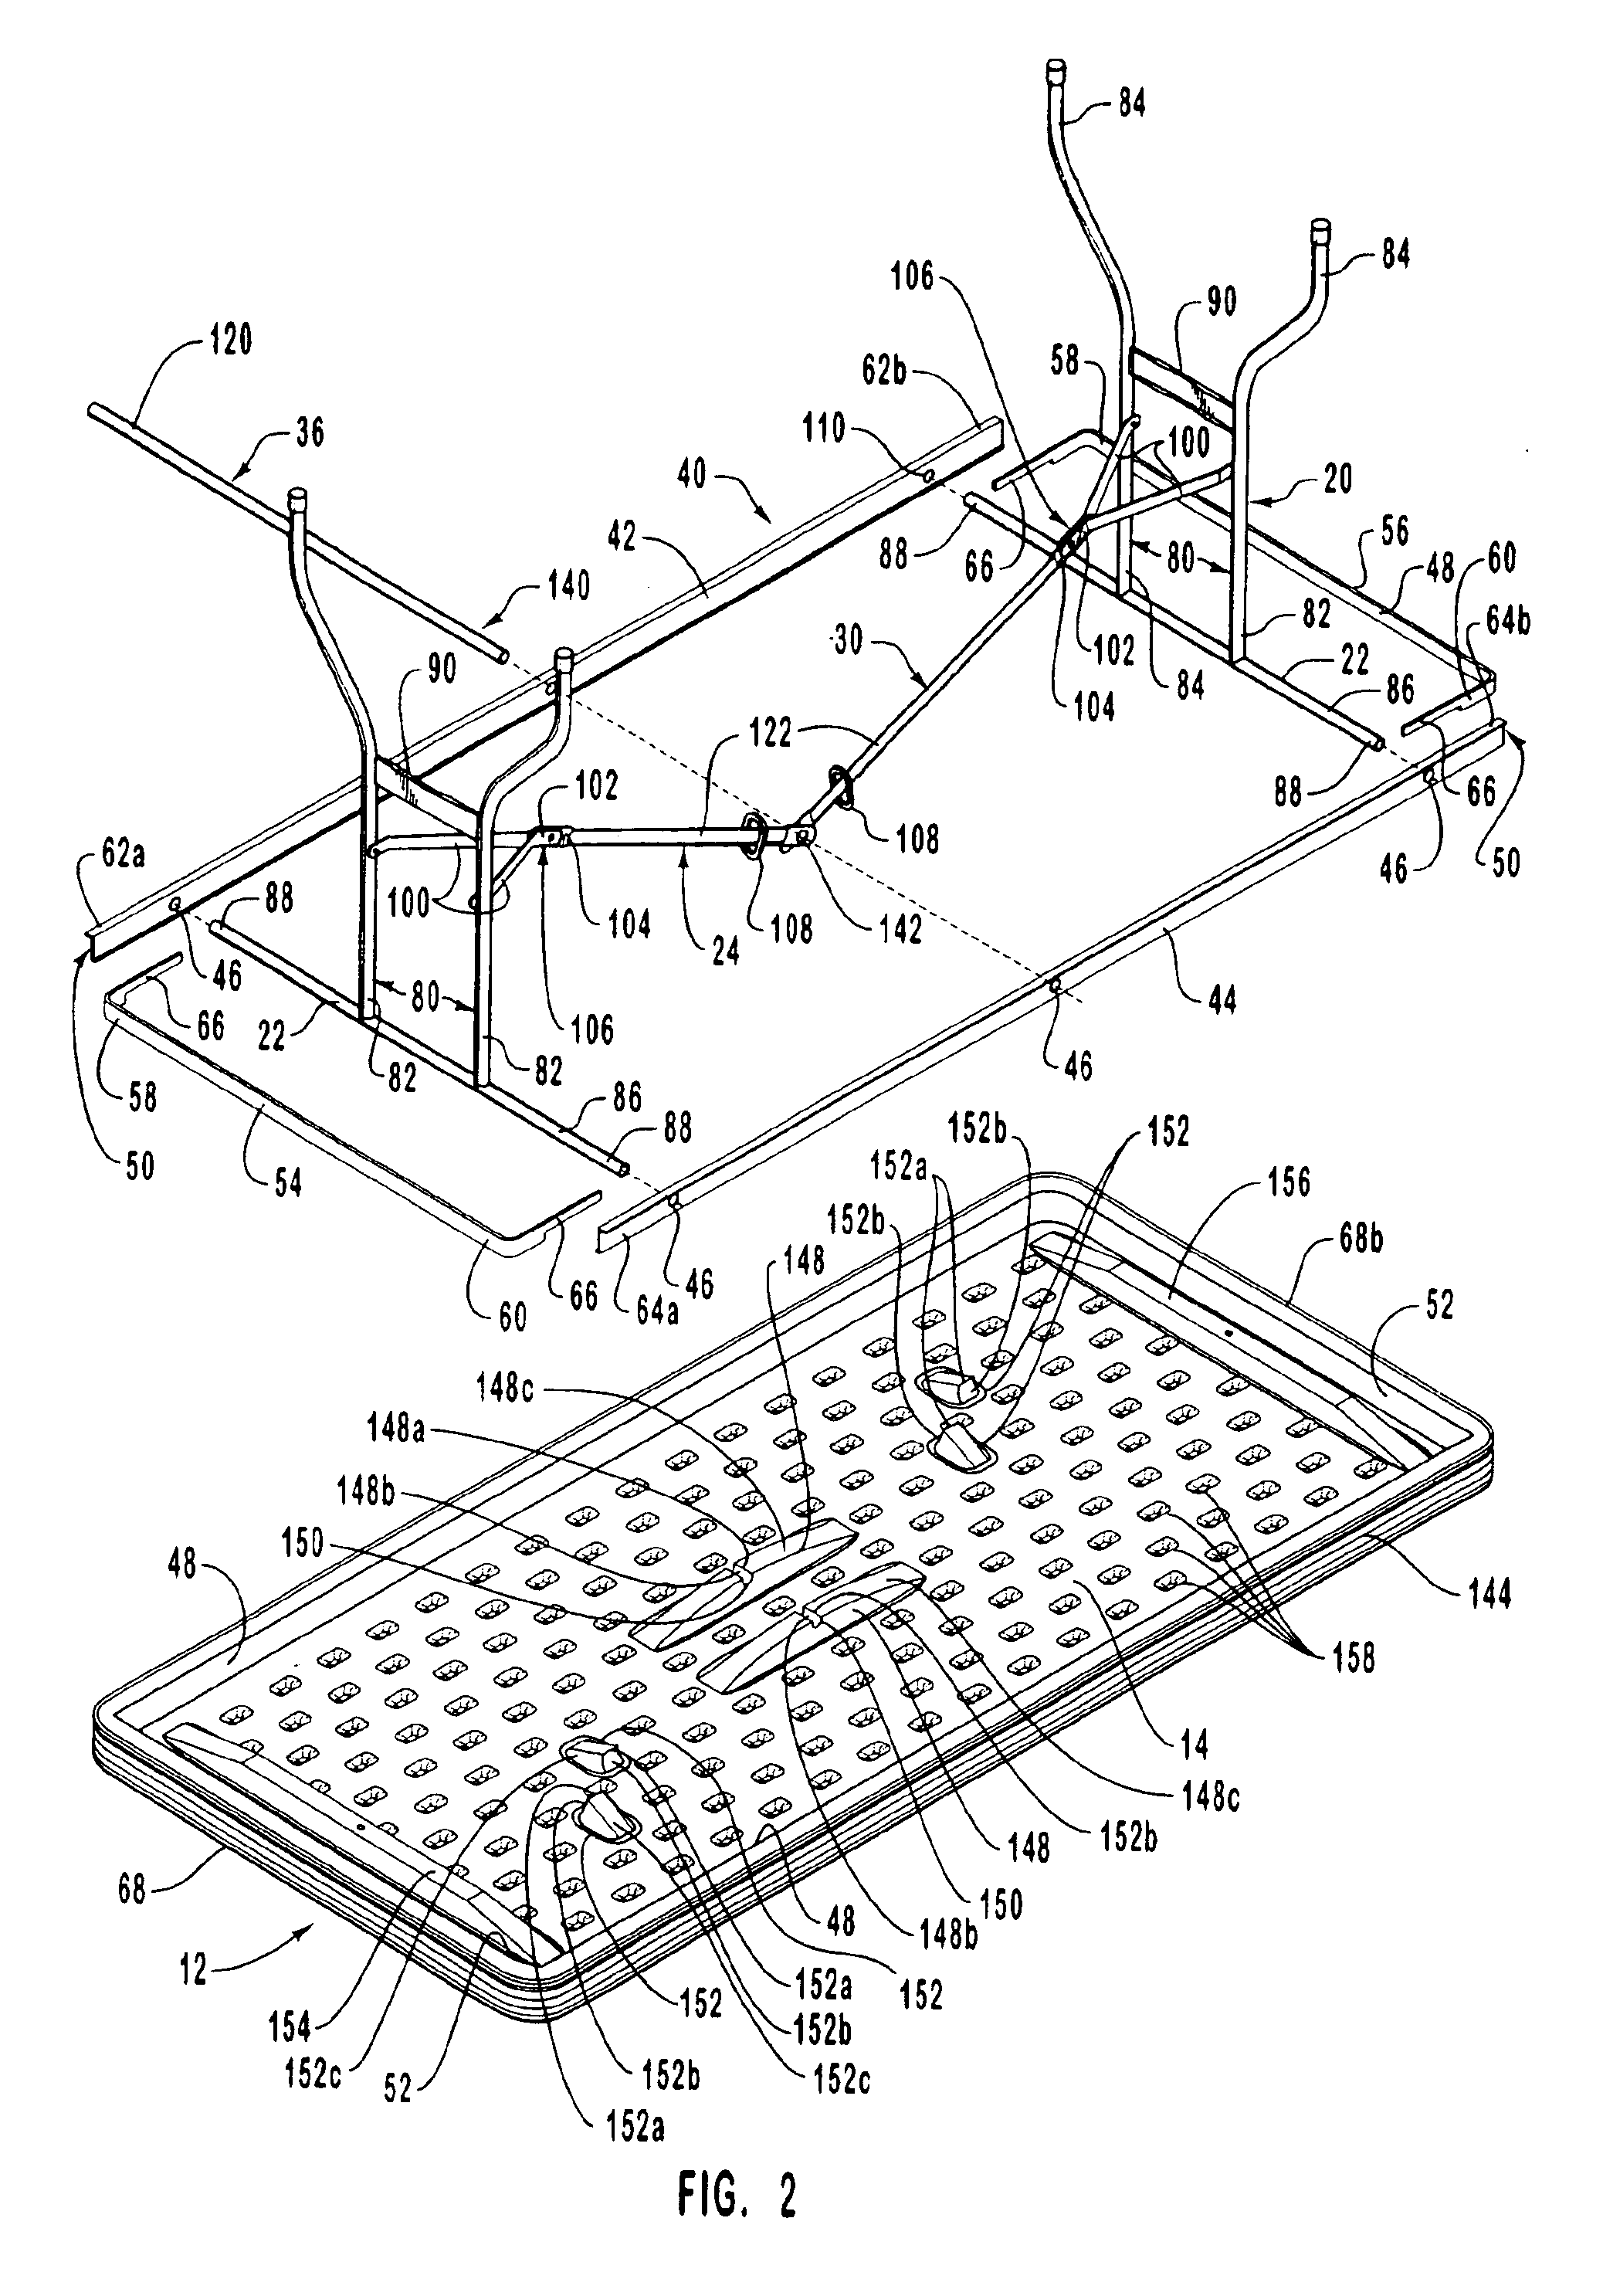 Portable folding utility table with frame connected to integral lip